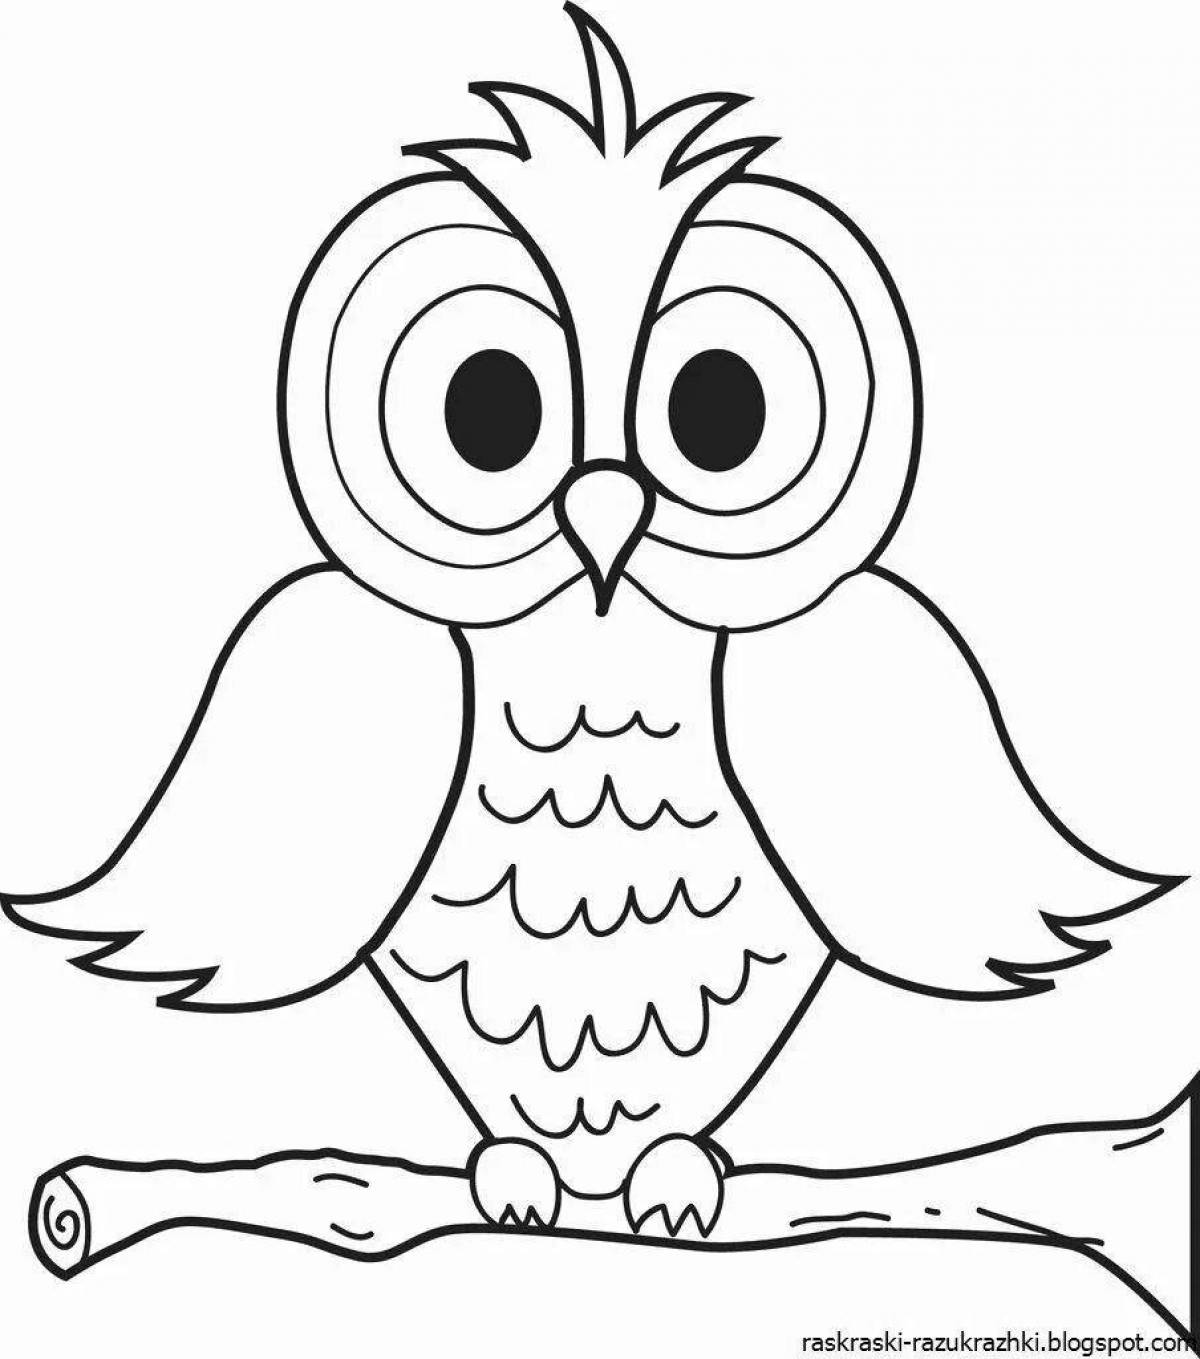 Radiant owlet coloring book for kids